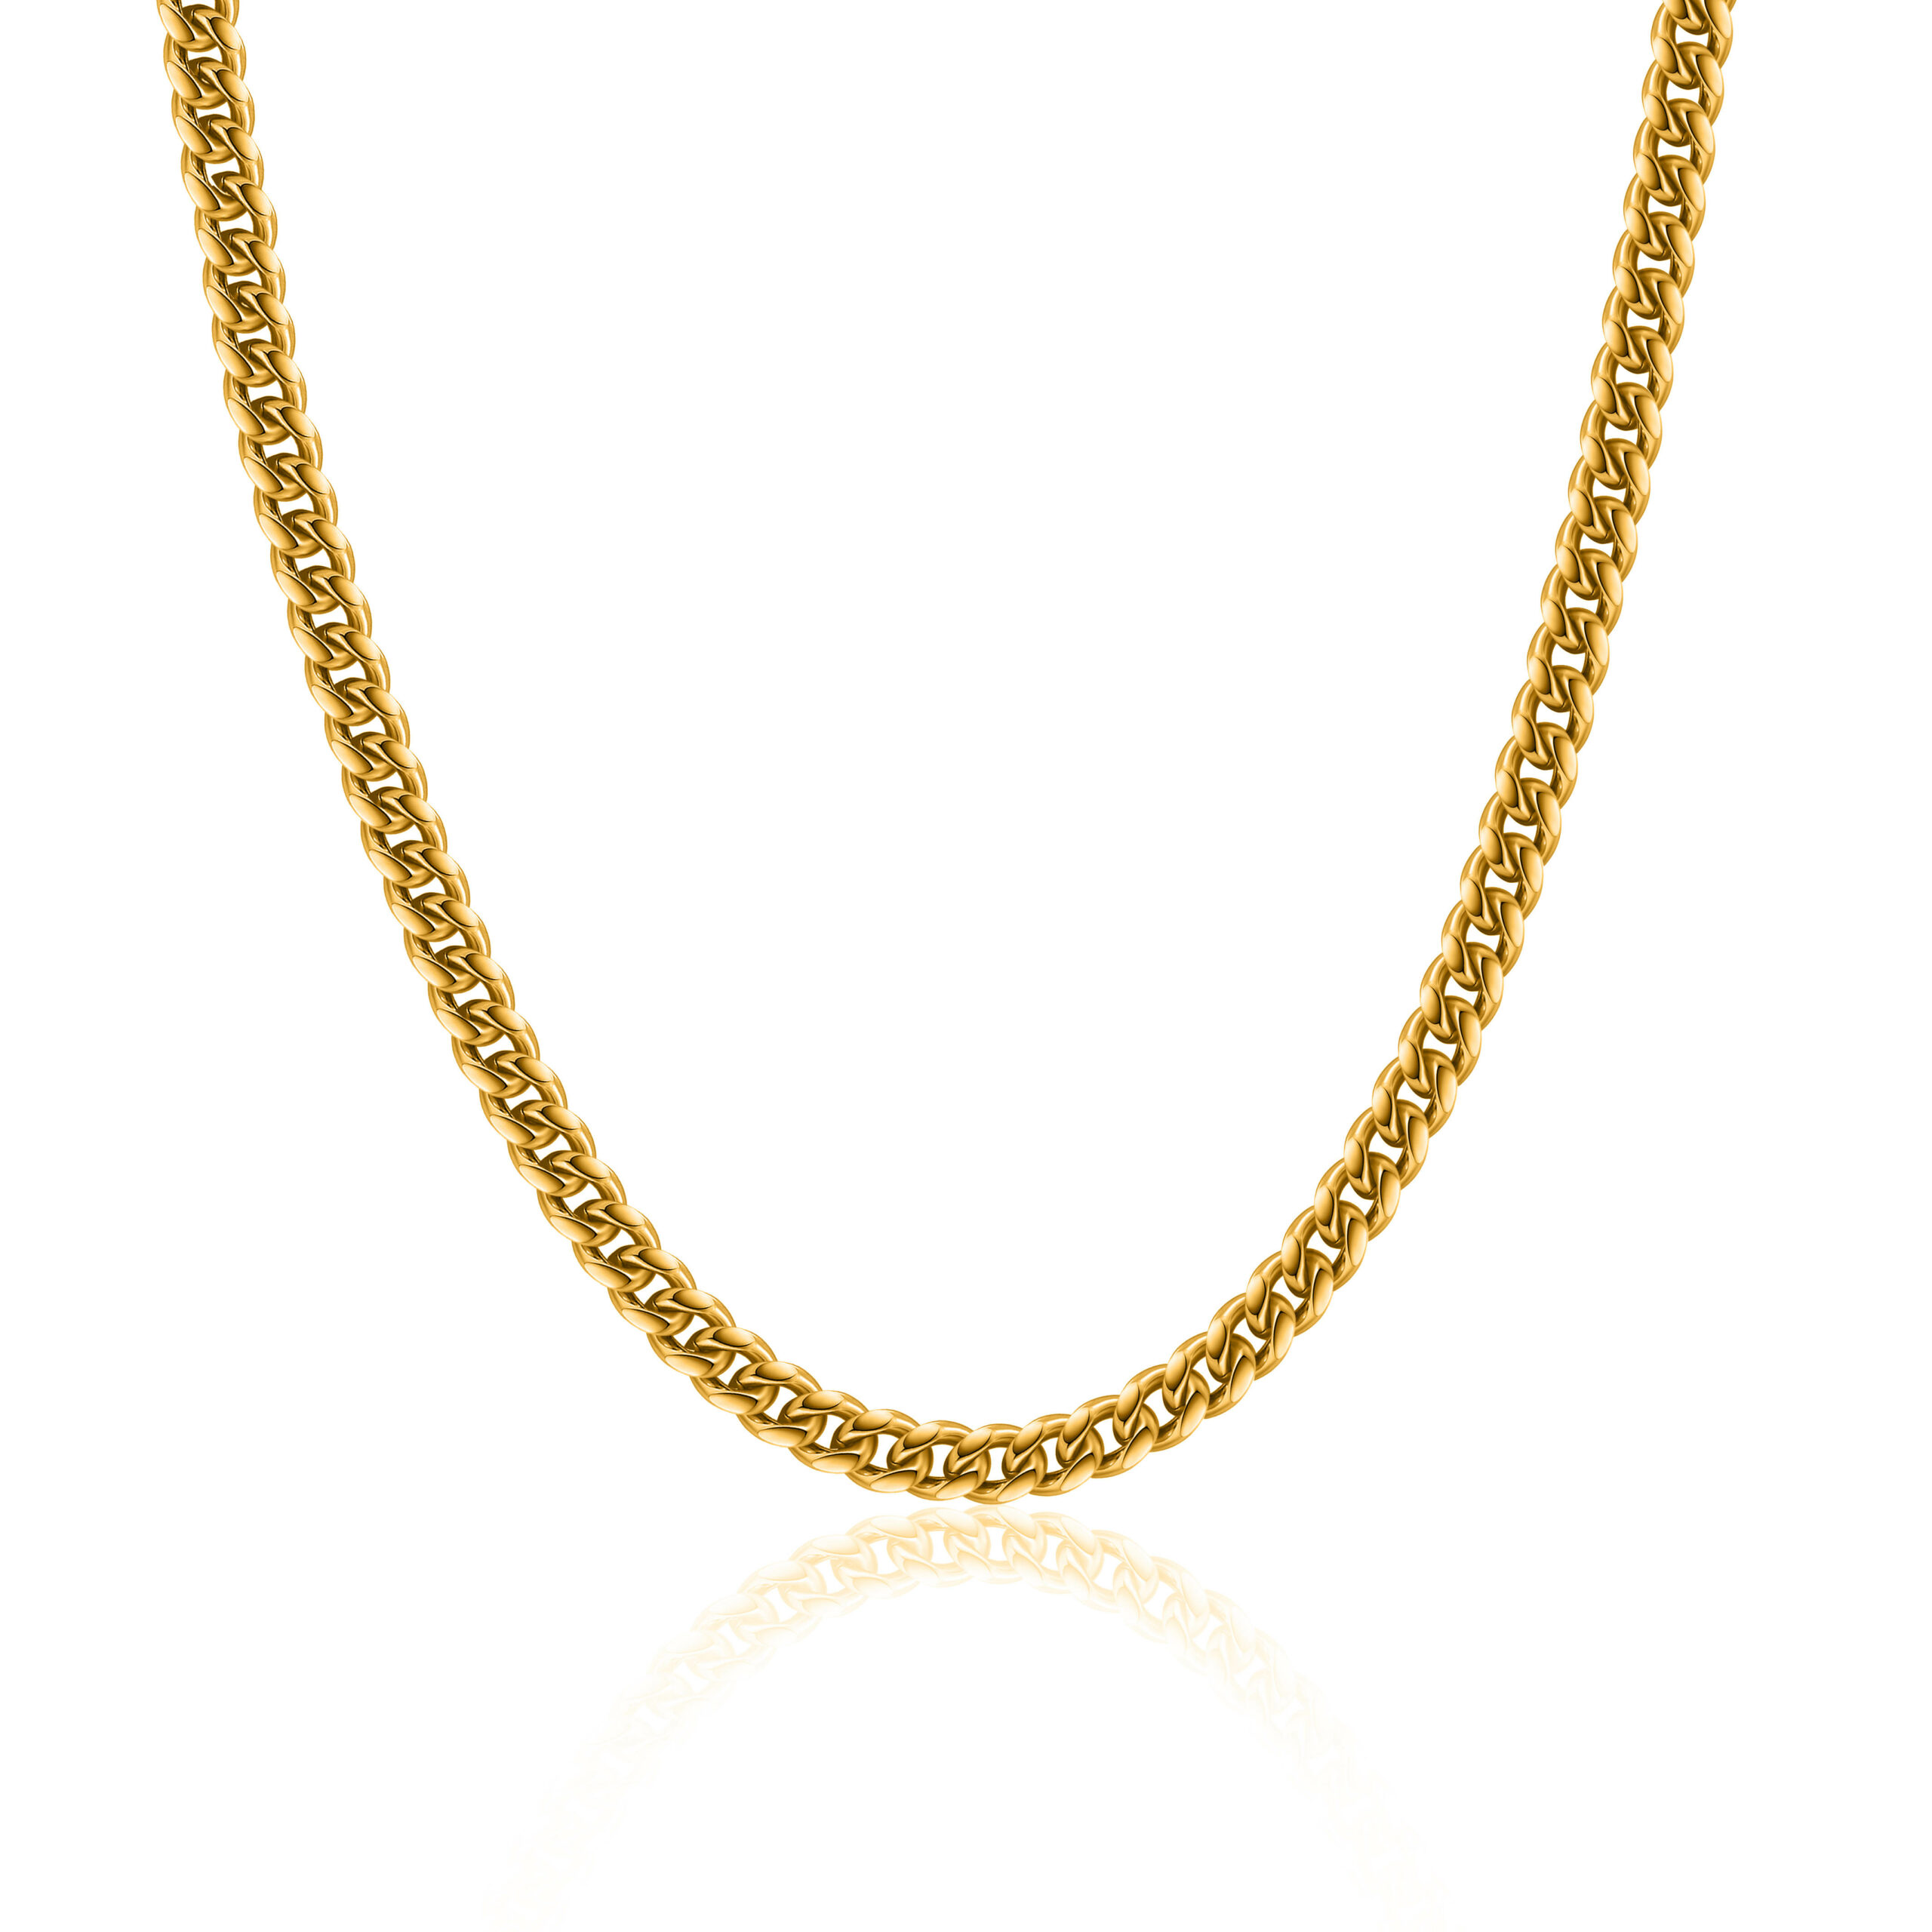 Stainless Steel Gold Chain Necklace Christmas Gift Idea Women's